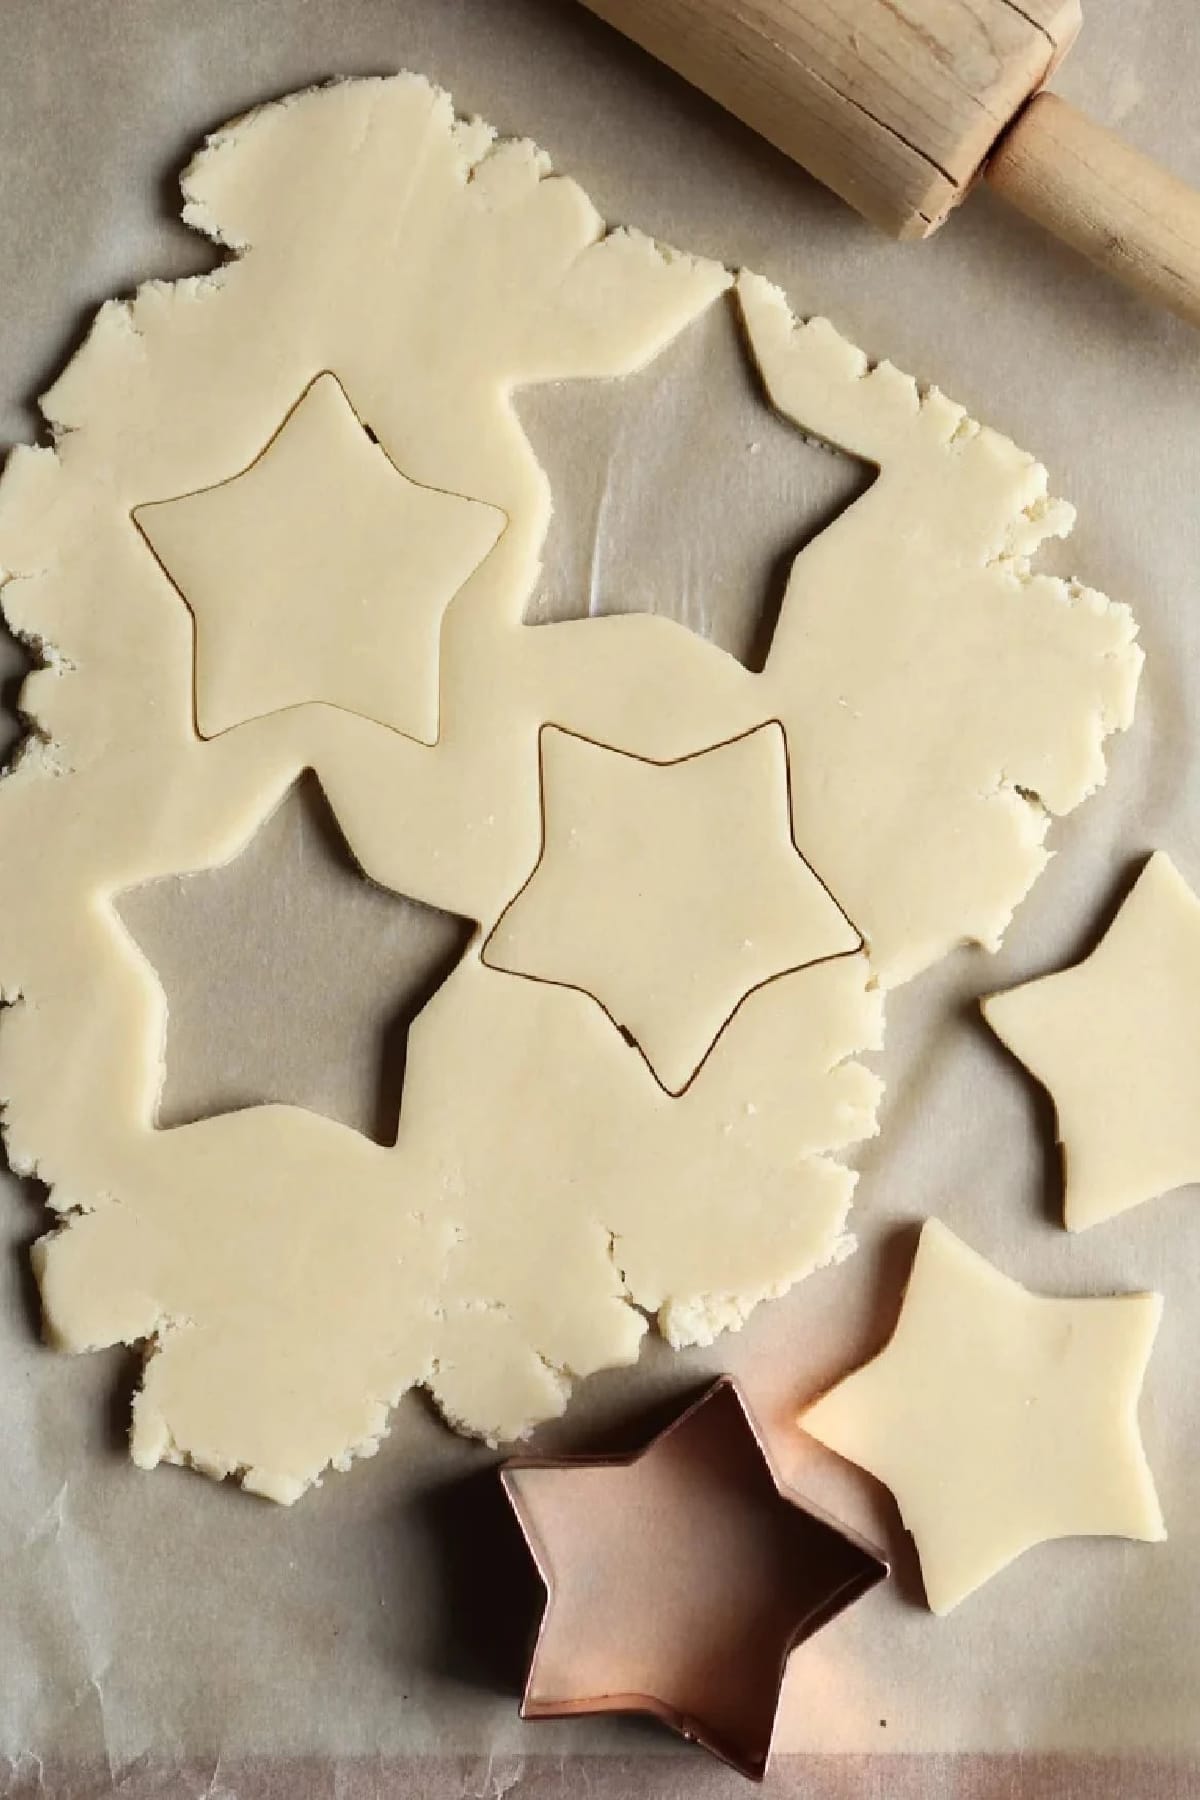 Sugar Cookie dough with star shapes cut out